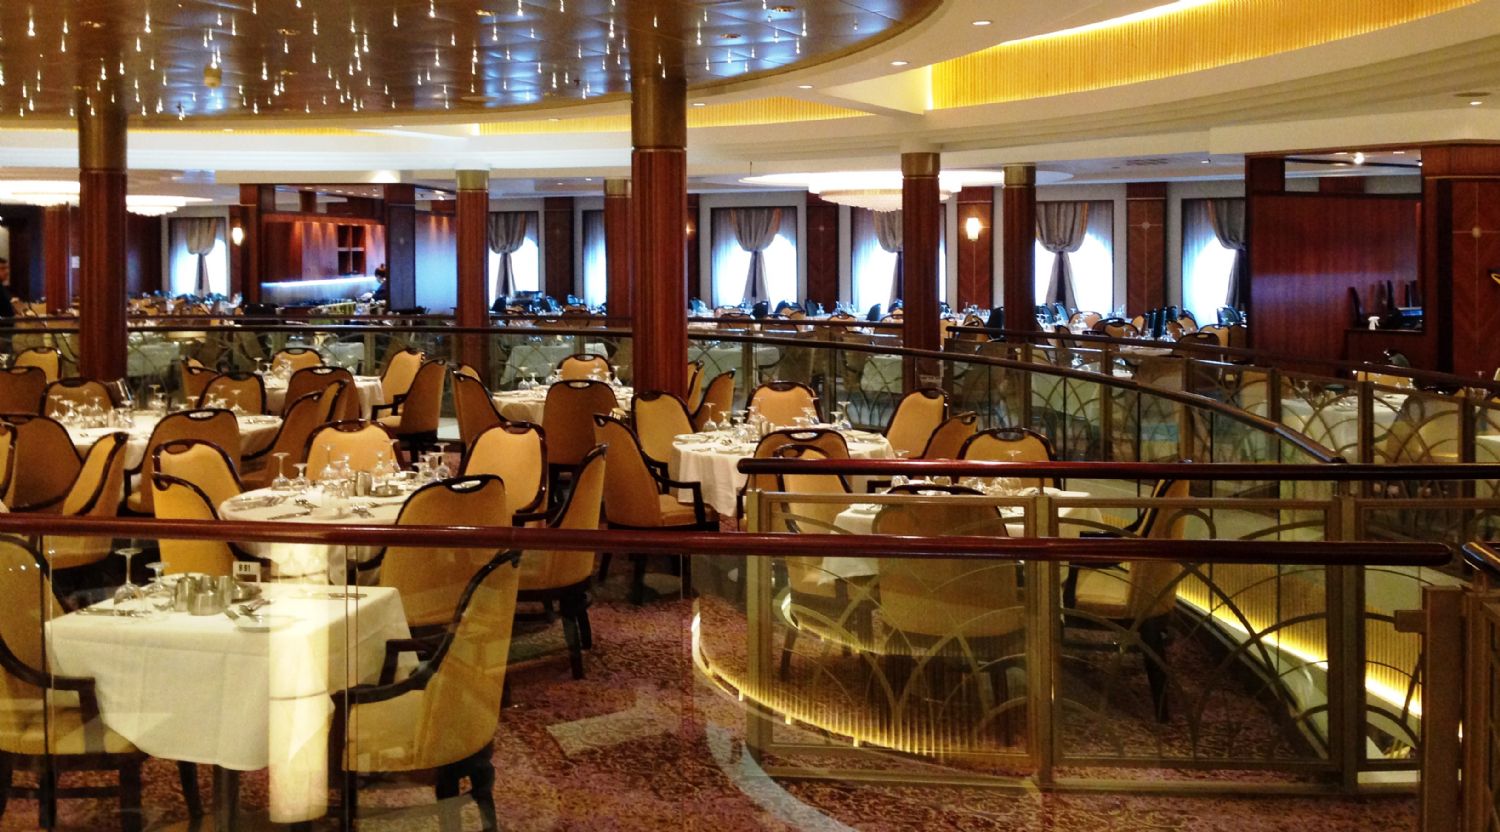 Oasis Of The Seas Dining Room Photos